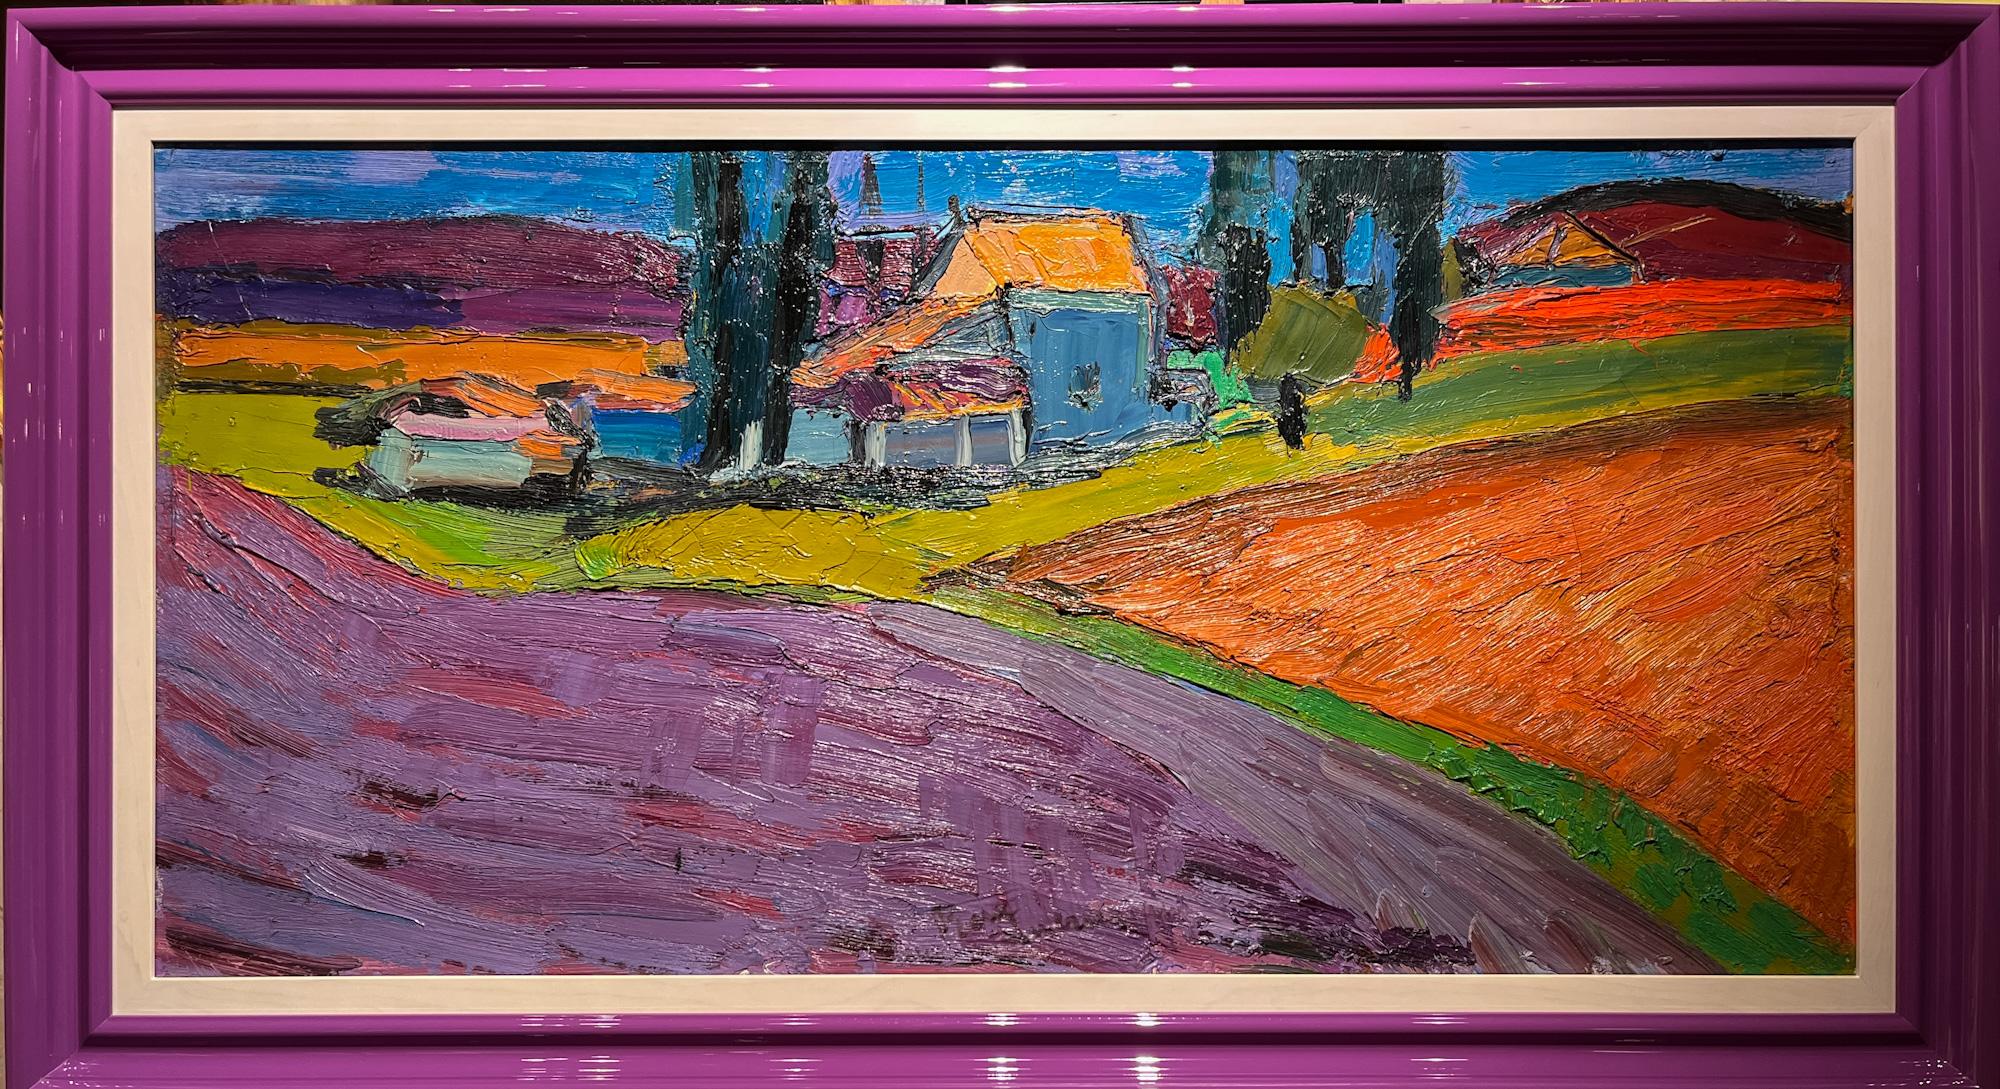 Landscape Provençal
Pierre Ambrogiani (France, 1905-1985)
Oil on canvas
Circa 1950's 
39 ¼ x 19 3/8

Self-taught artist from a very young age, influenced by Seyssaud and Chabaud, Pierre Ambrogiani defined himself as a “gourmet of colour.” He was